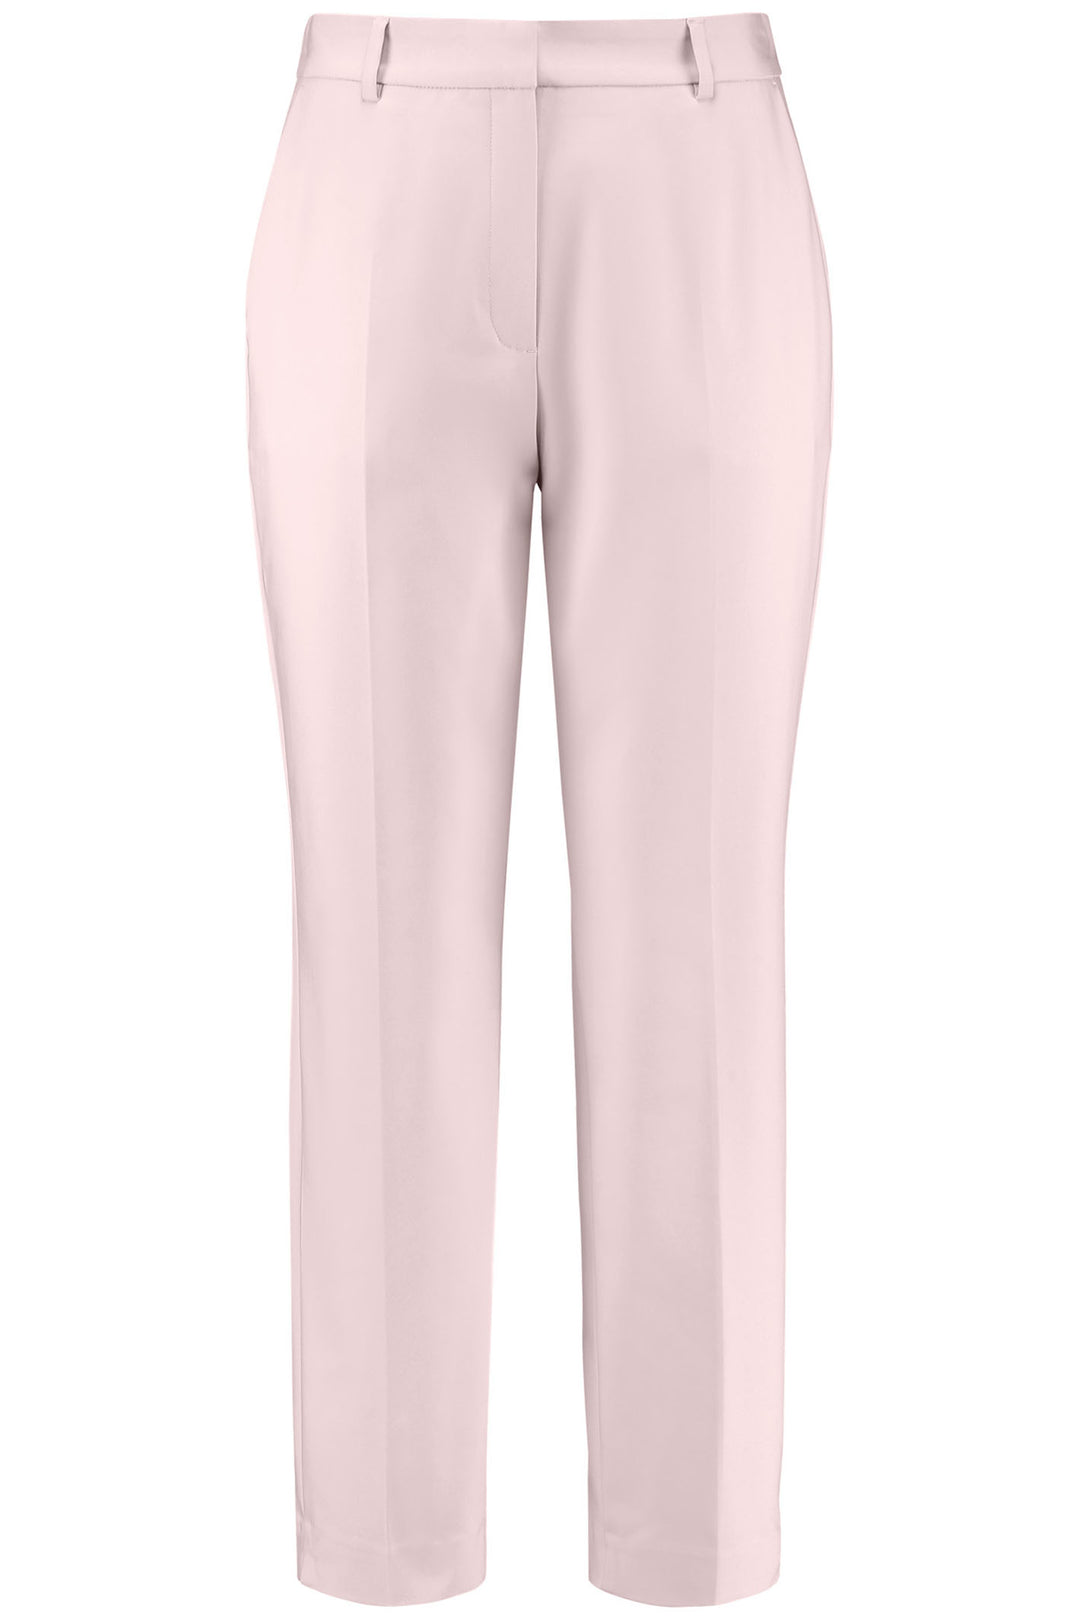 Gerry Weber 320006 Lotus Pink Trousers - Experience Boutique